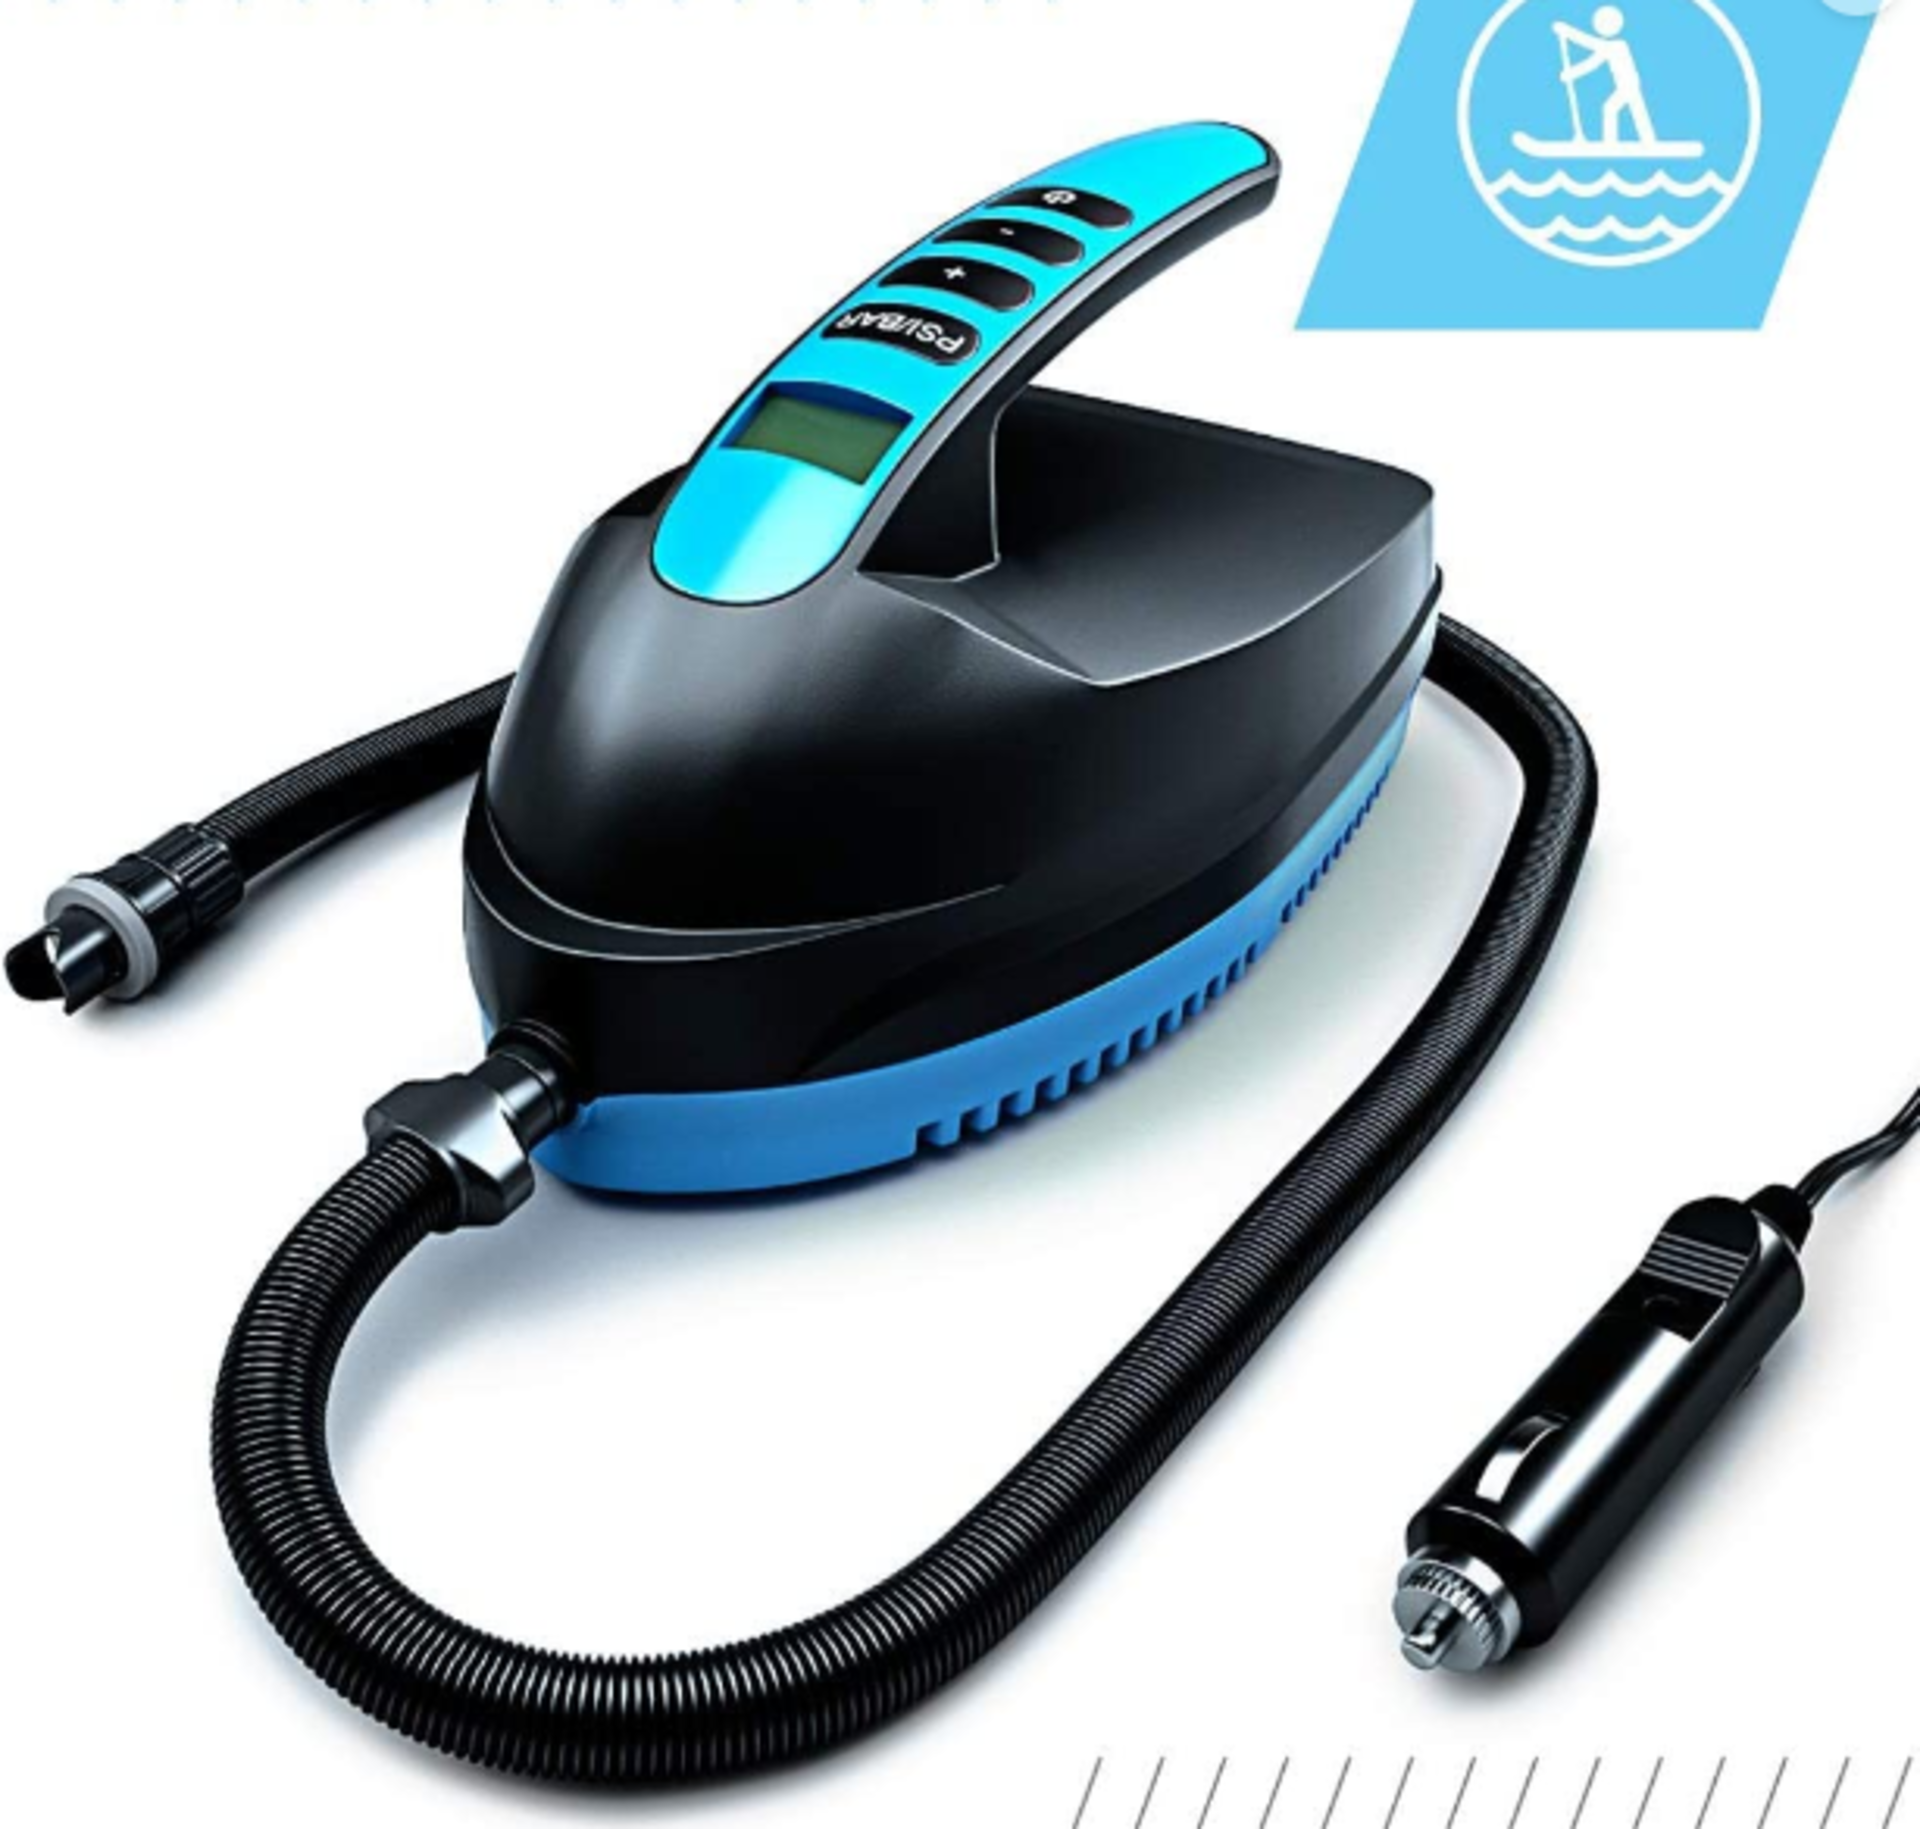 "Bluefin Fitness Electric Pump RRP 129.00 RAPID INFLATION ? Inflates a regular-sized SUP board to - Image 2 of 2